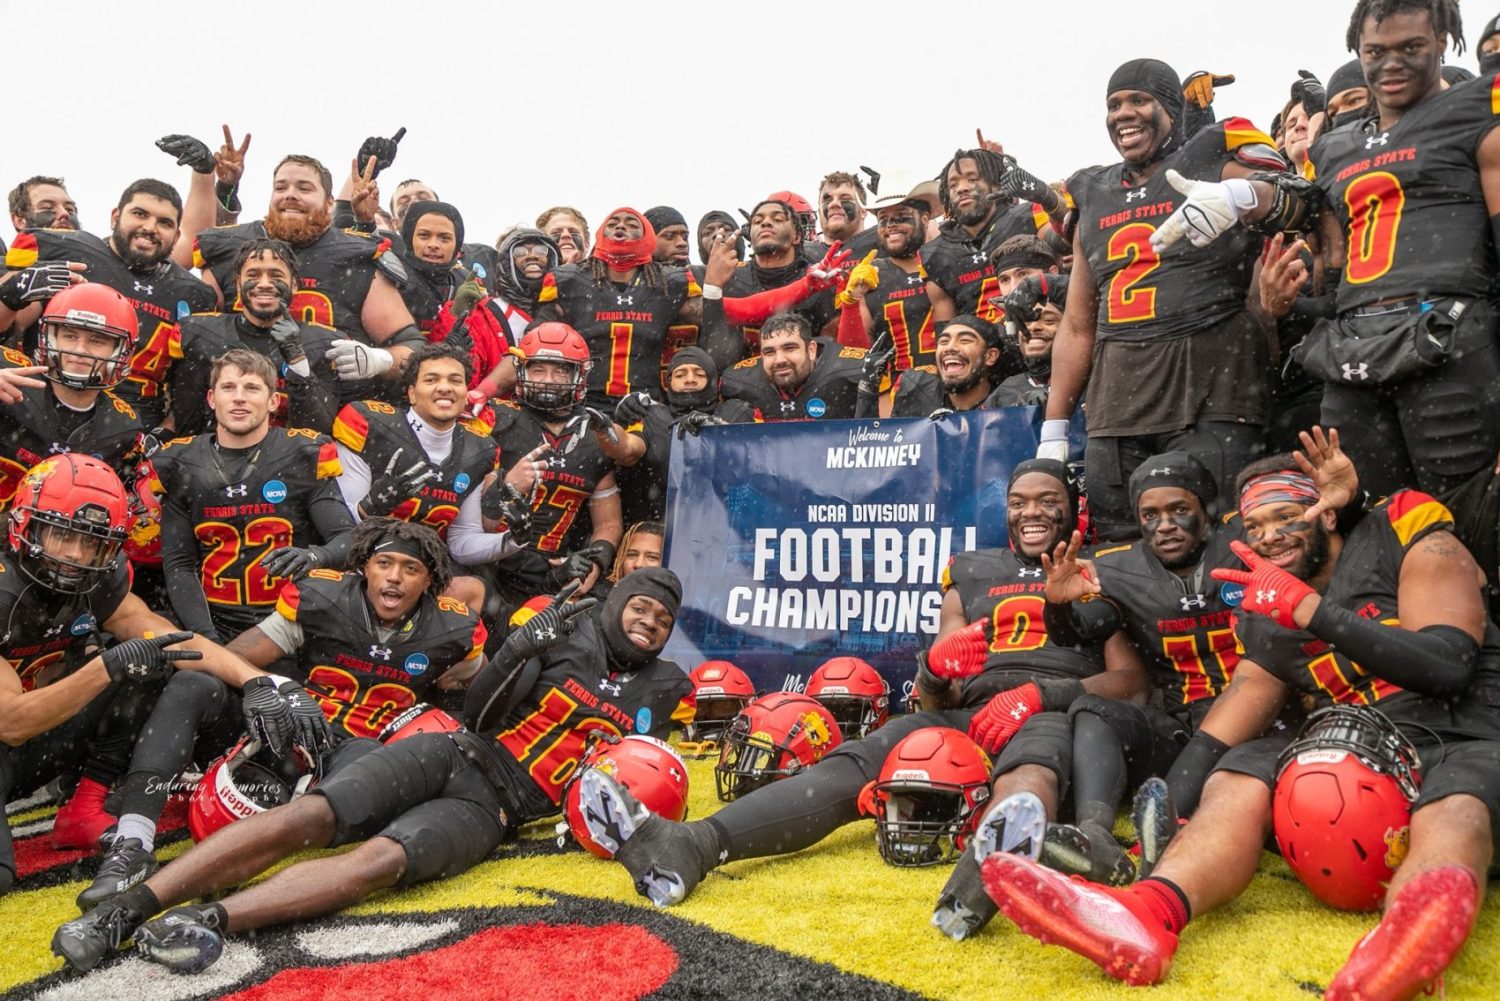 Ferris State heading back to national championship game